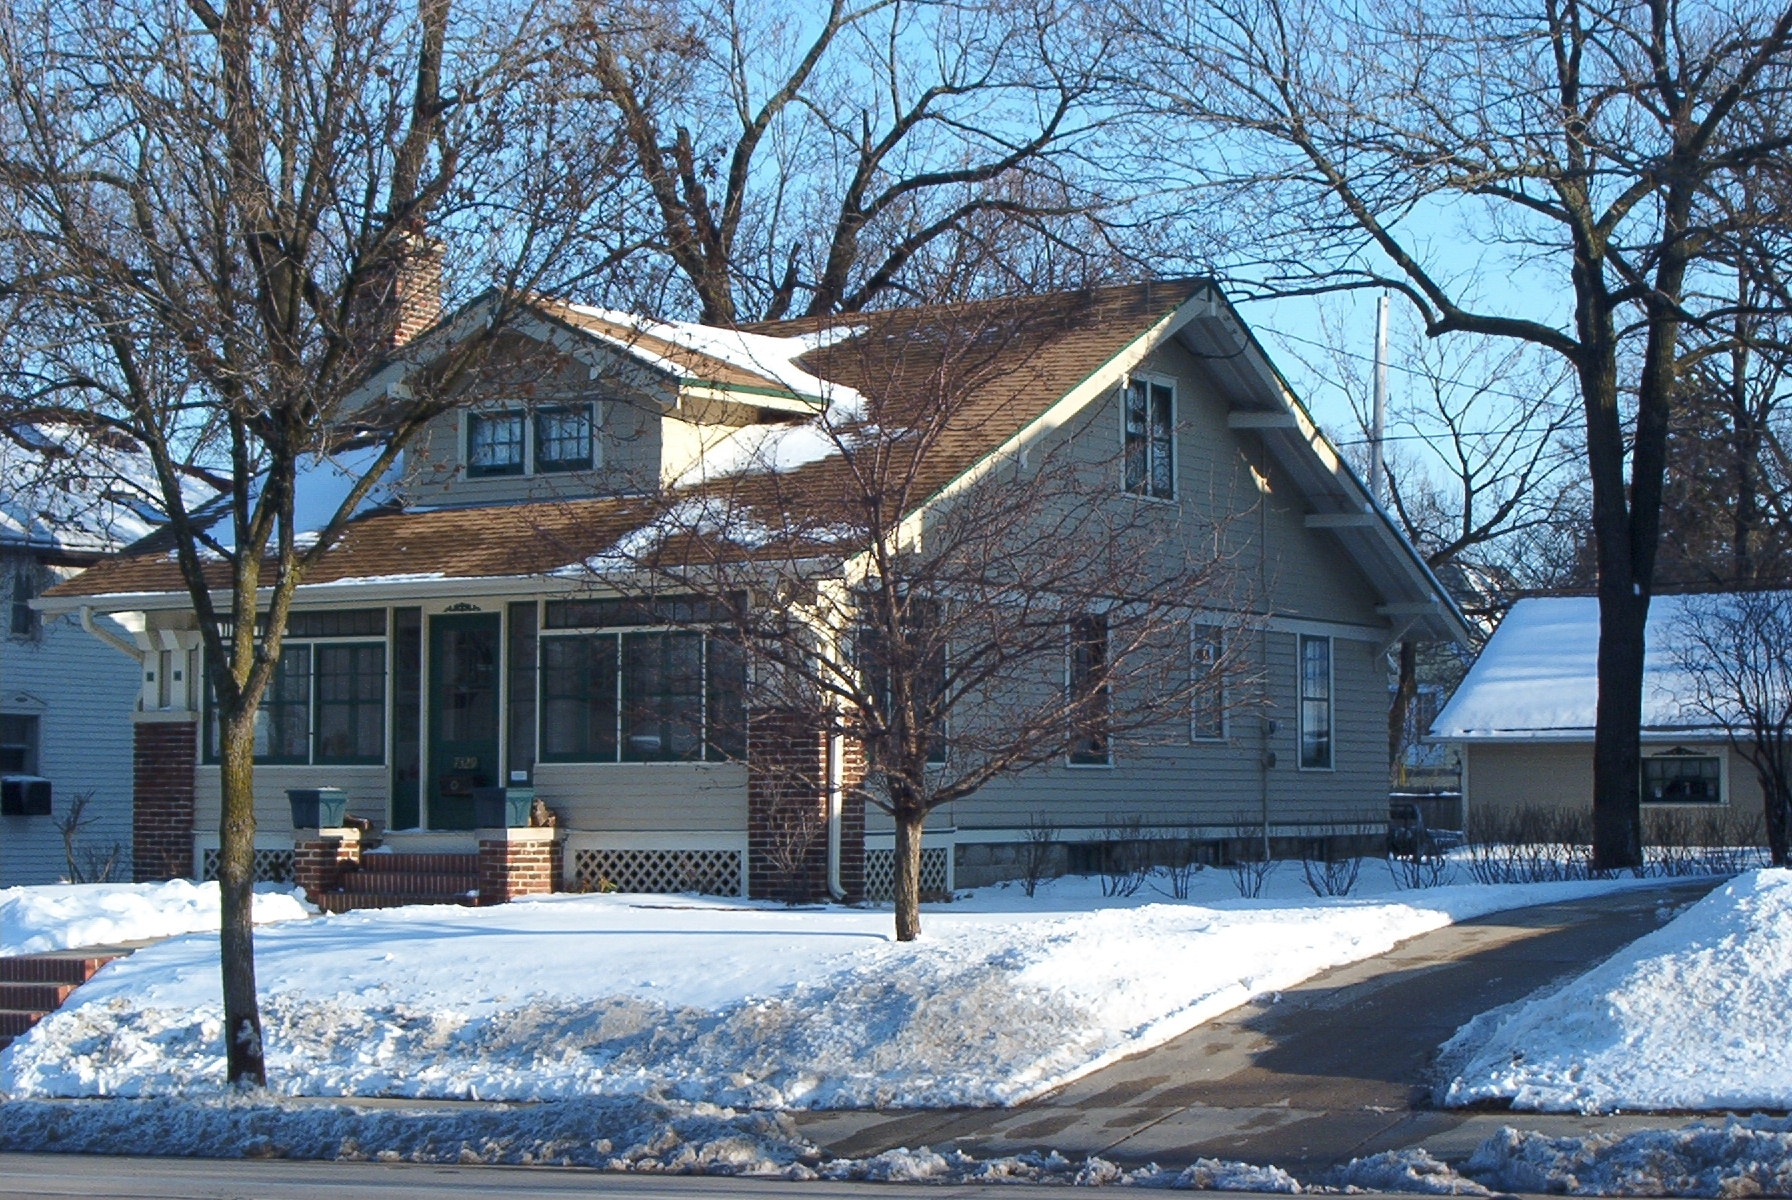 7329 W NORTH AVE, a Bungalow house, built in Wauwatosa, Wisconsin in 1921.